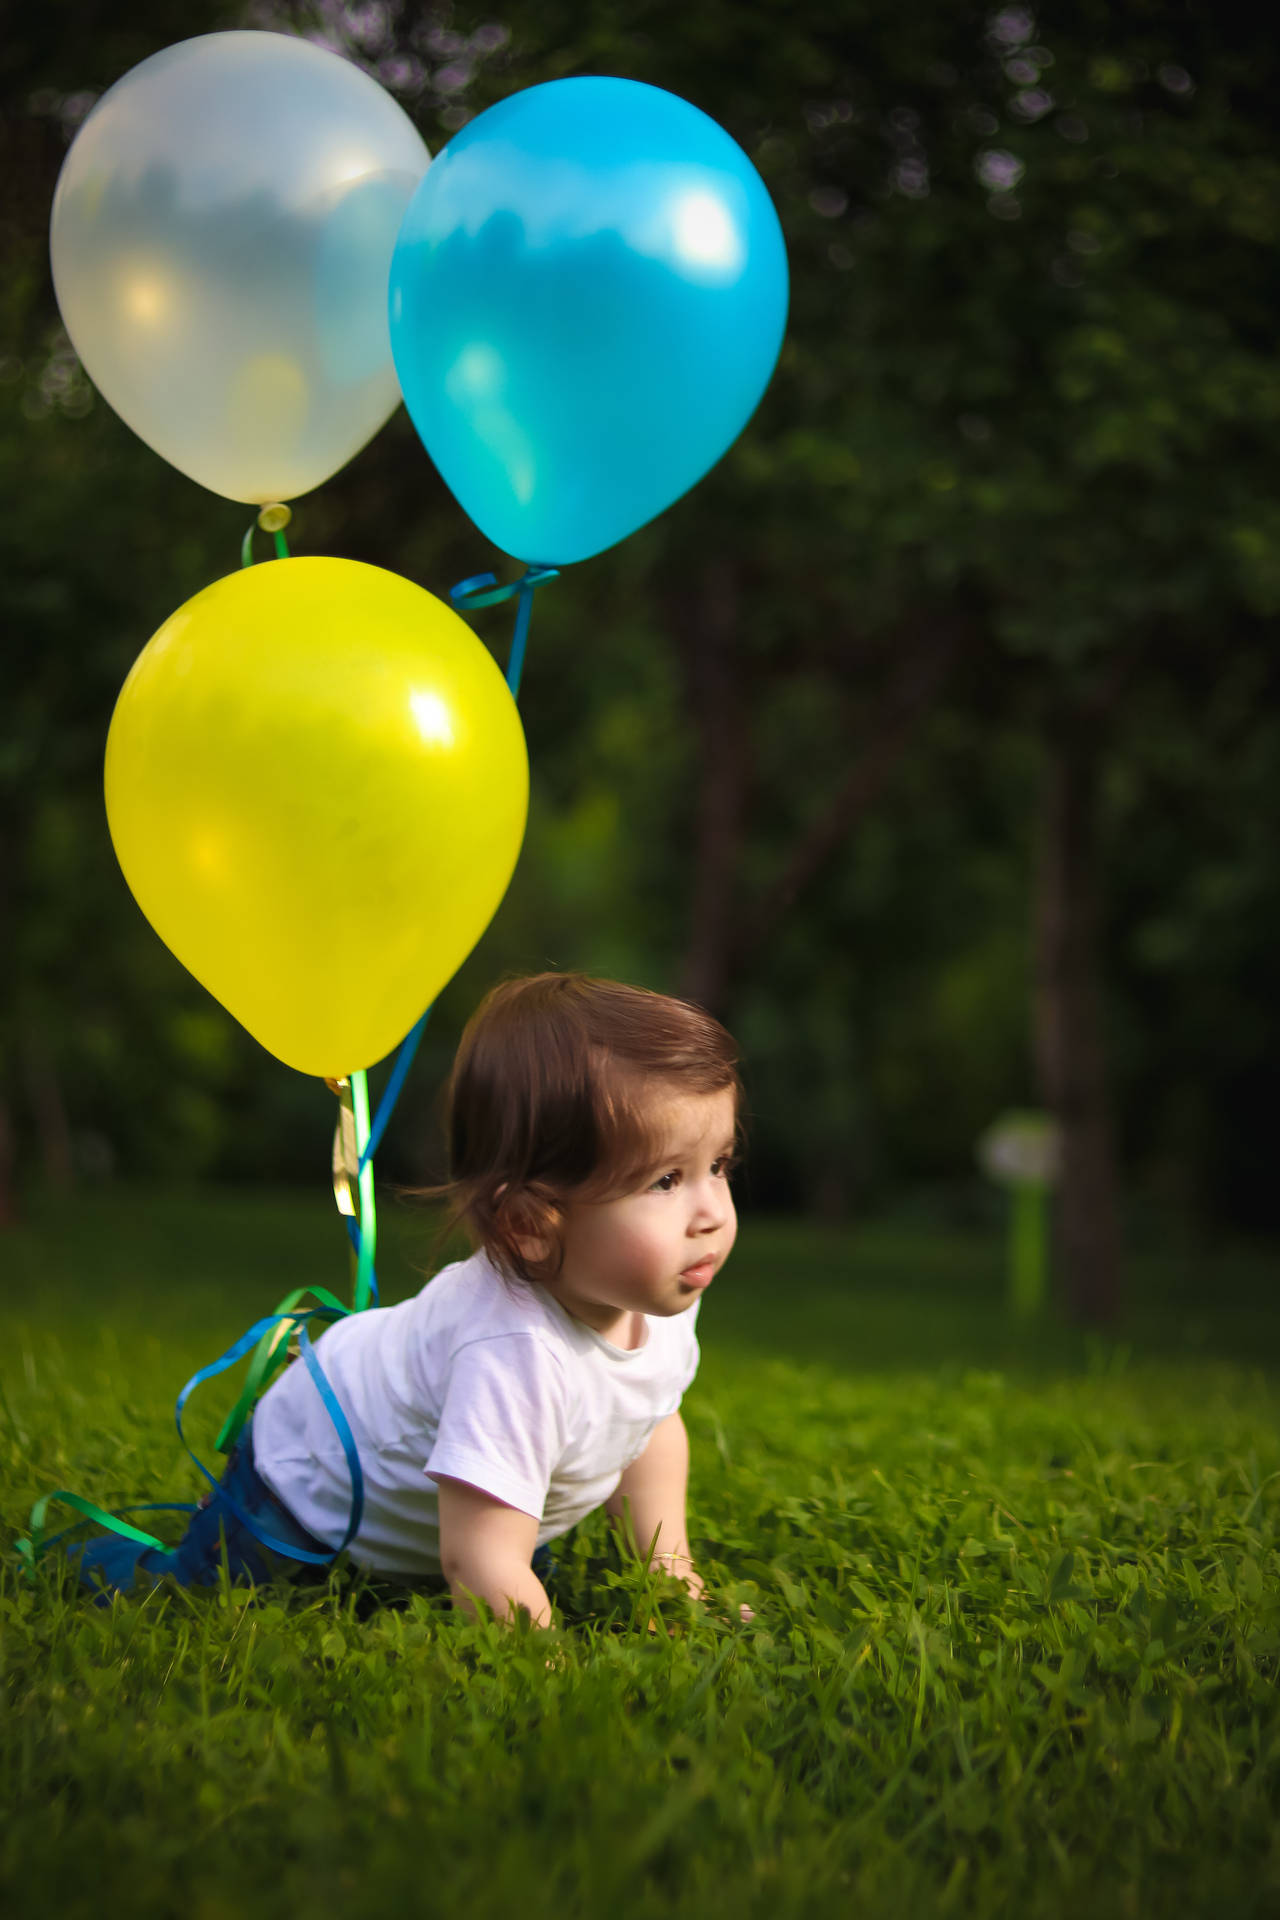 Cute Baby Crawling On Grass With Balloons Wallpaper